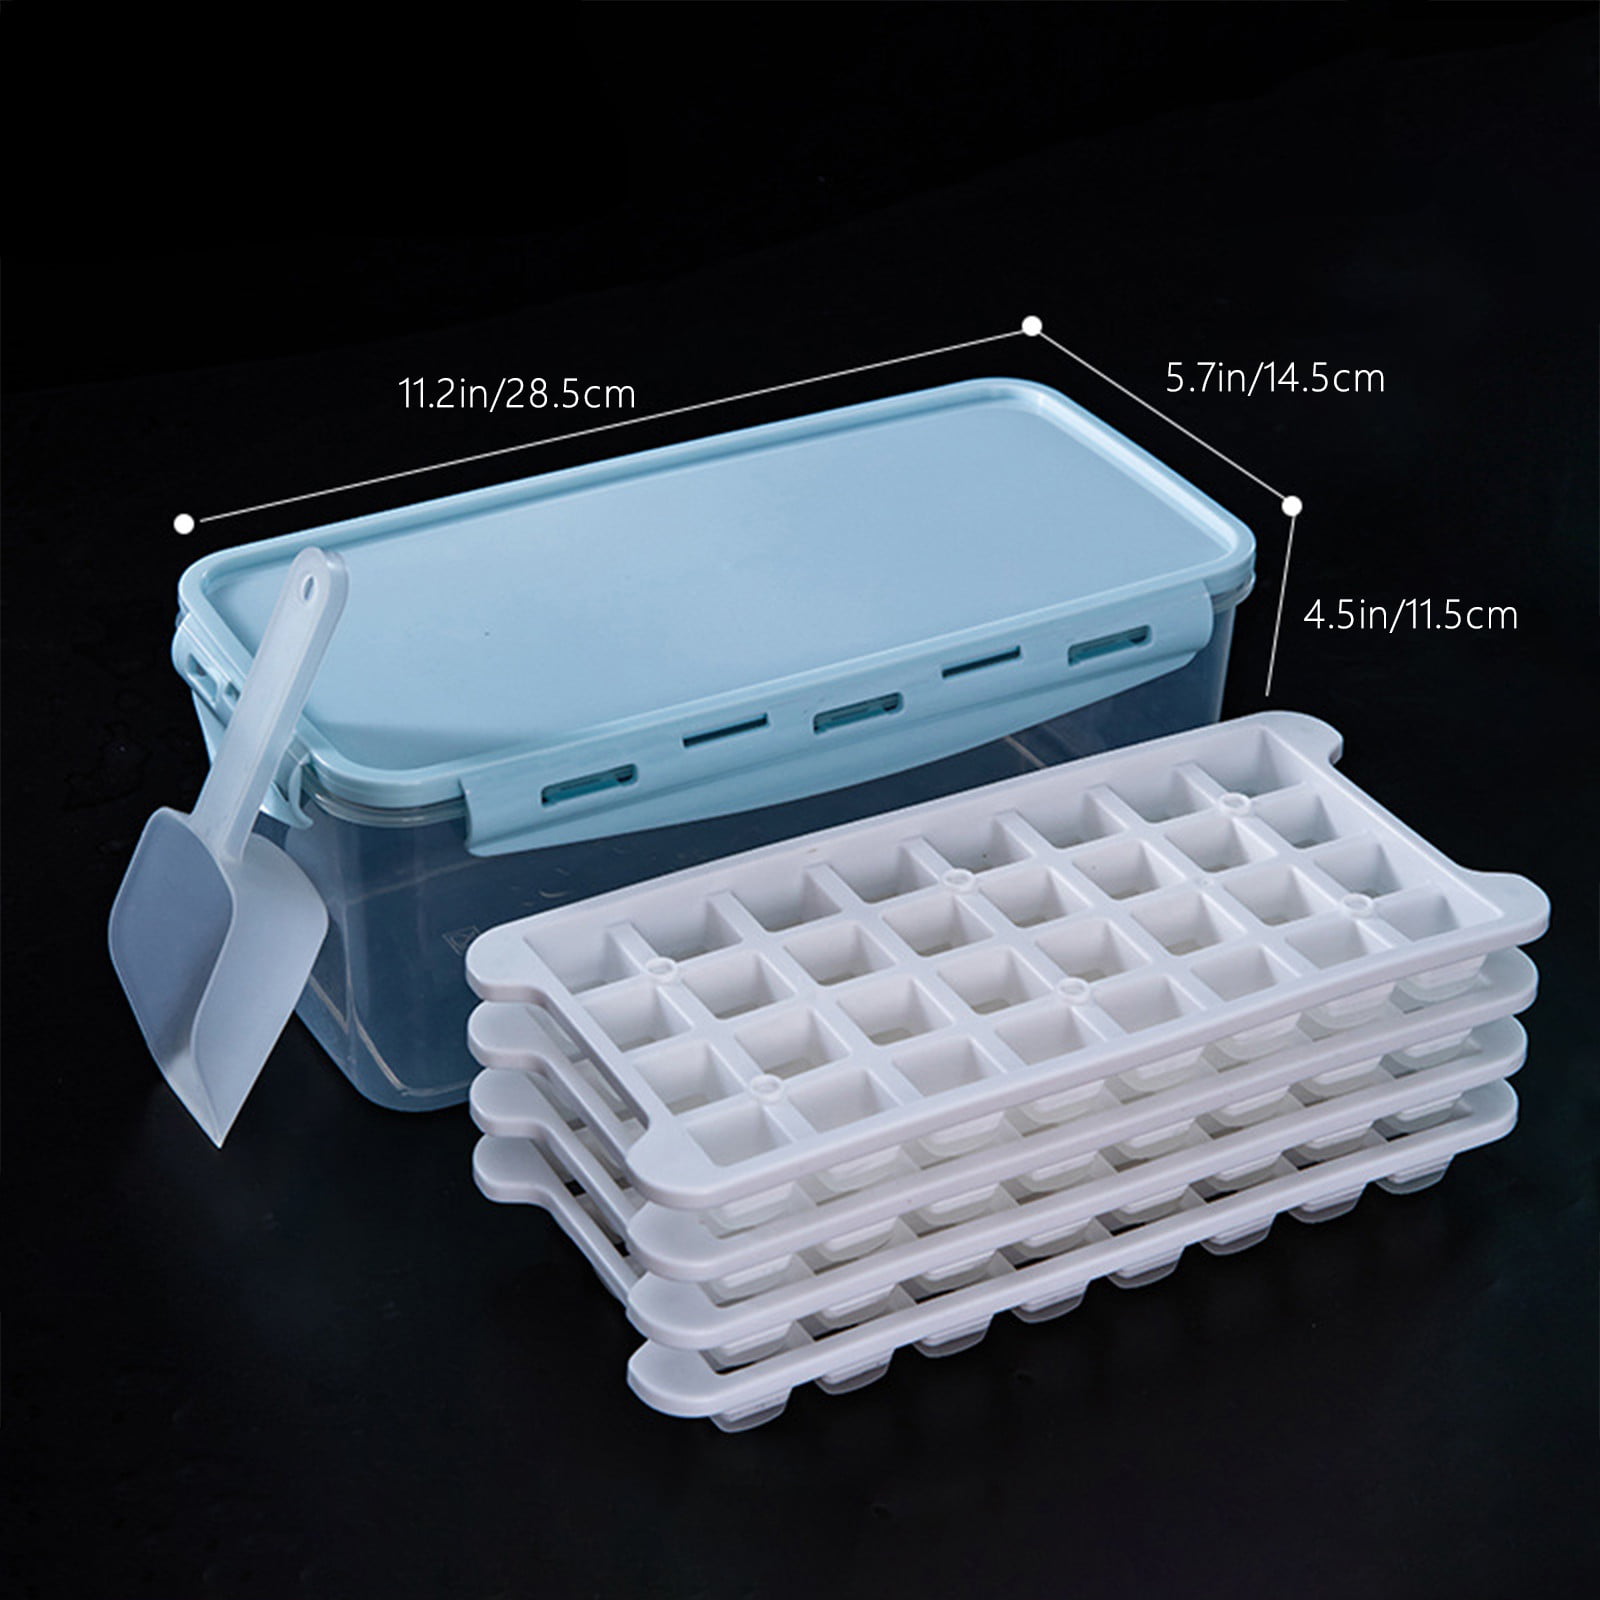 USA Silicone Ice Cube Tray, United States Ice Cube Trays for Freezer,  States Ice Cube Mold, US Map Ice Tray, Ice Ball Maker Mold for Deep  Freezer